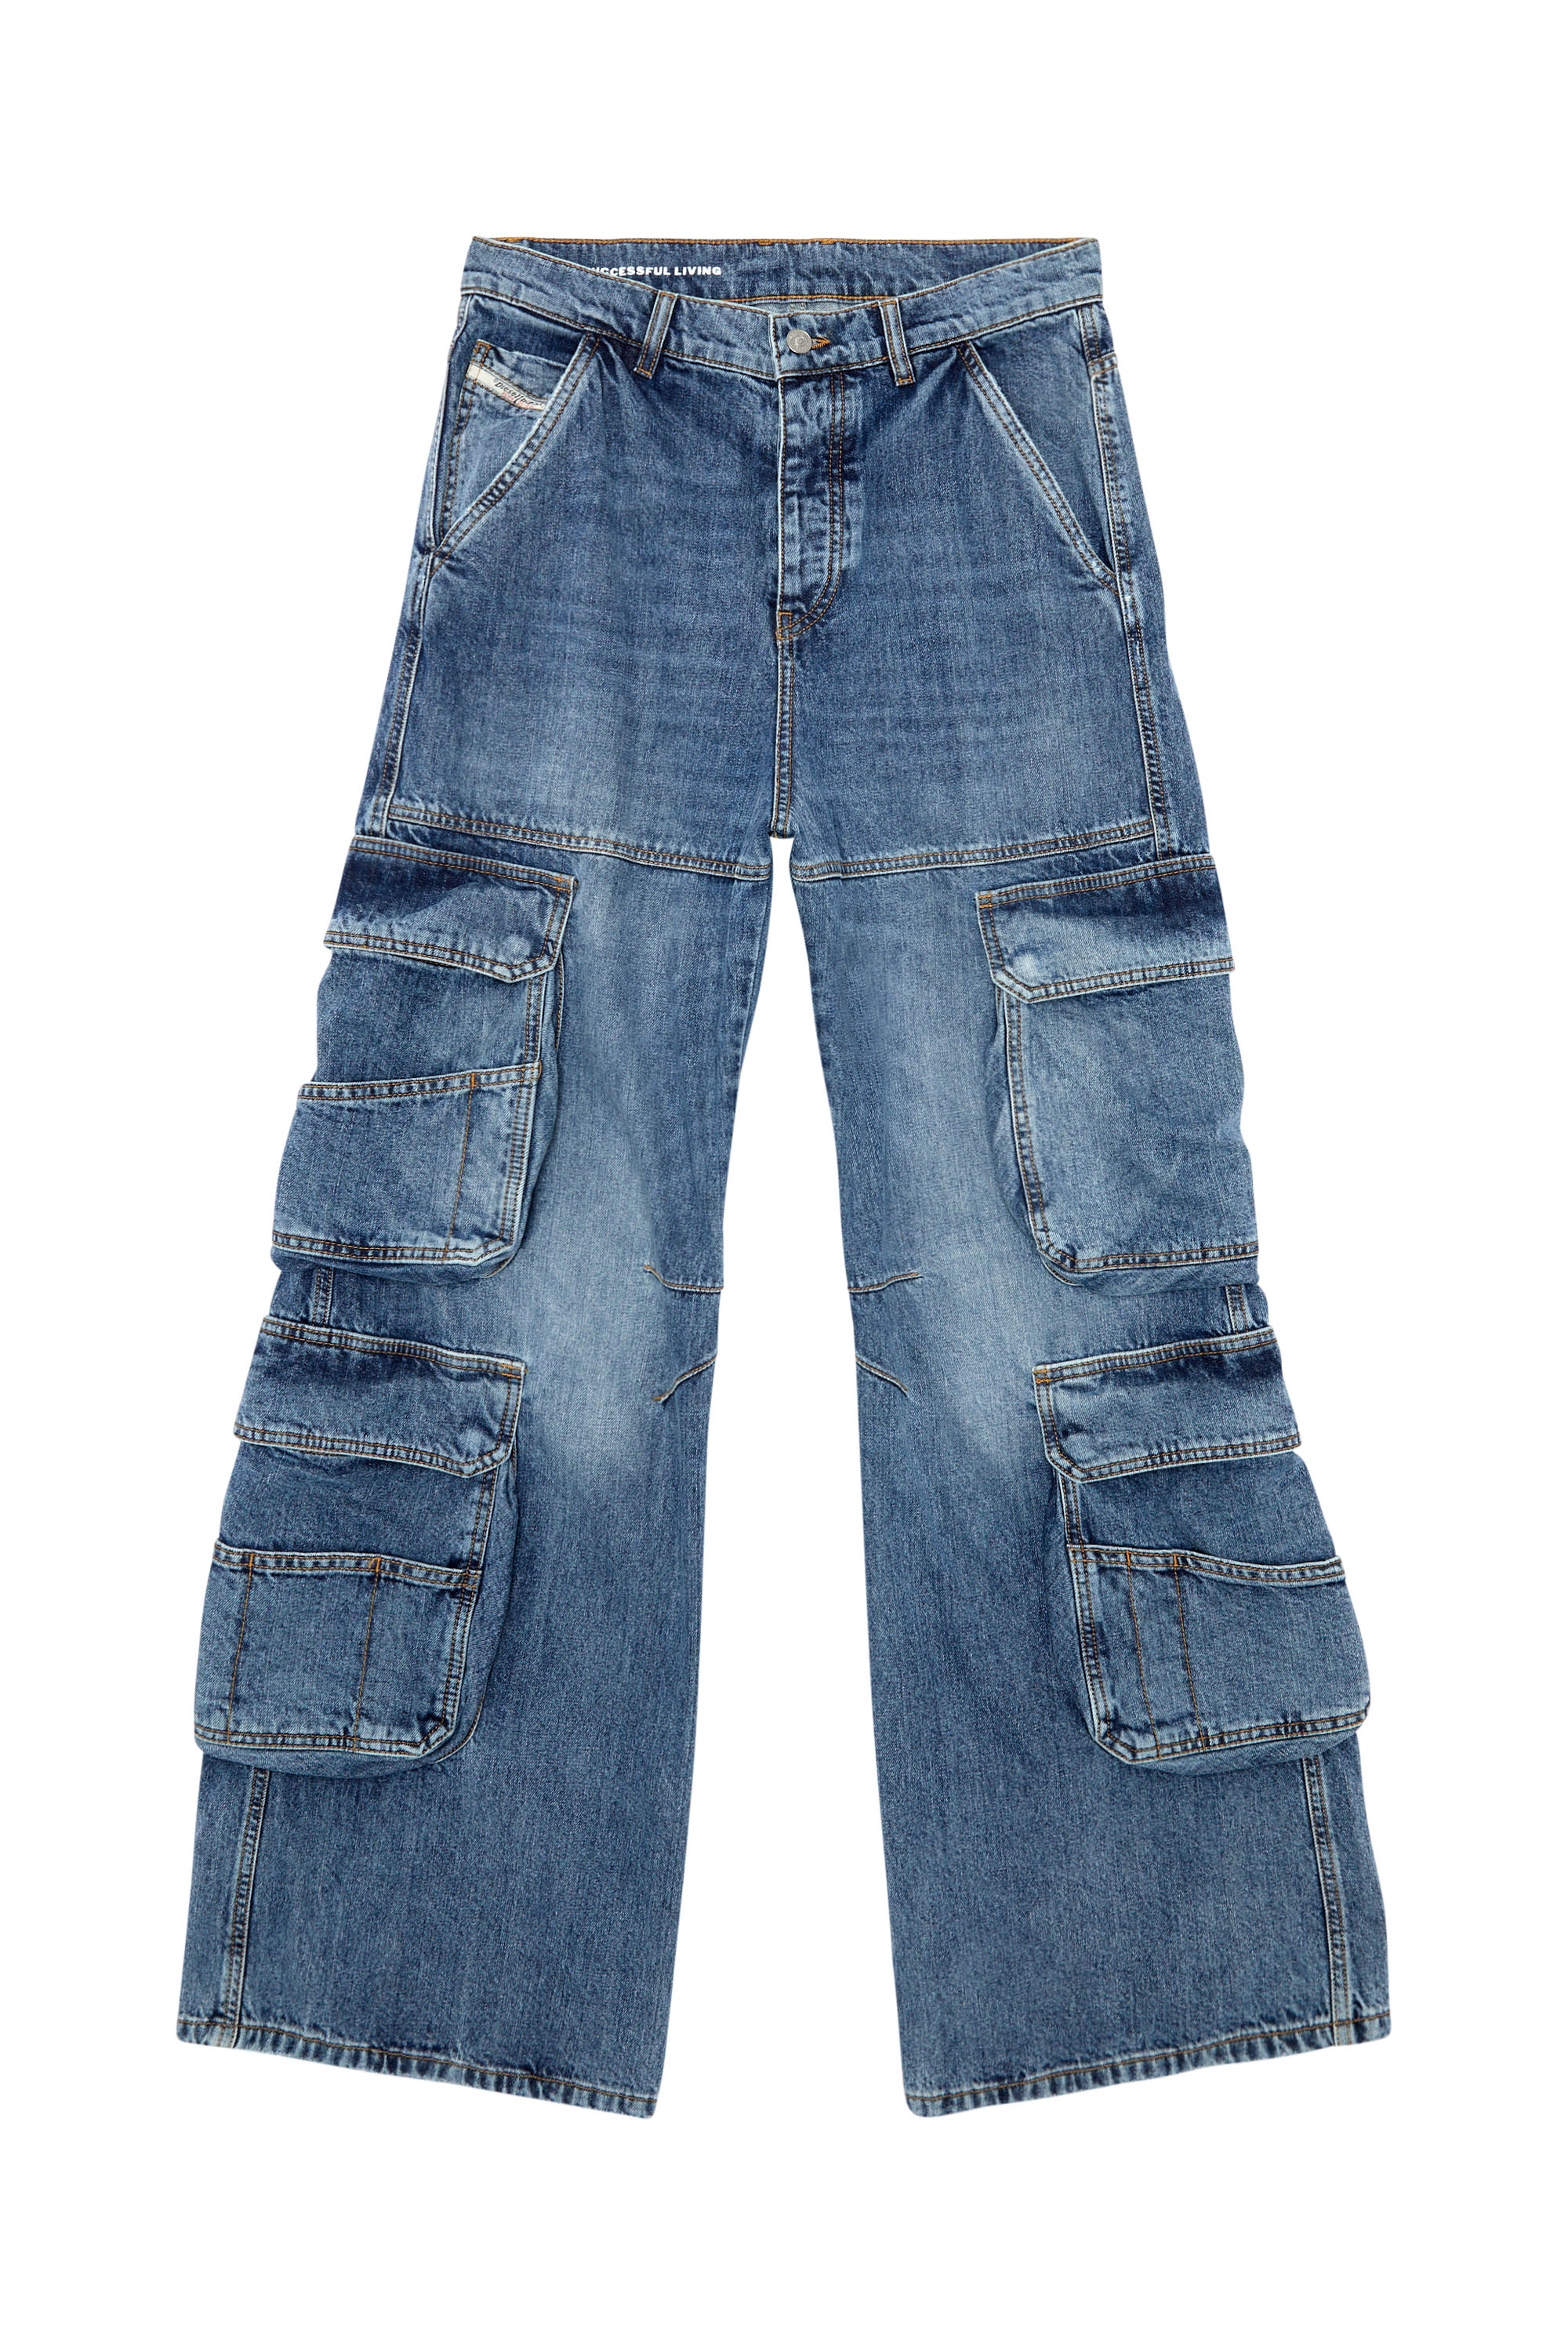 Diesel - Straight Jeans 1996 D-Sire 0NLAX, Mujer Straight Jeans - 1996 D-Sire in Azul marino - Image 5